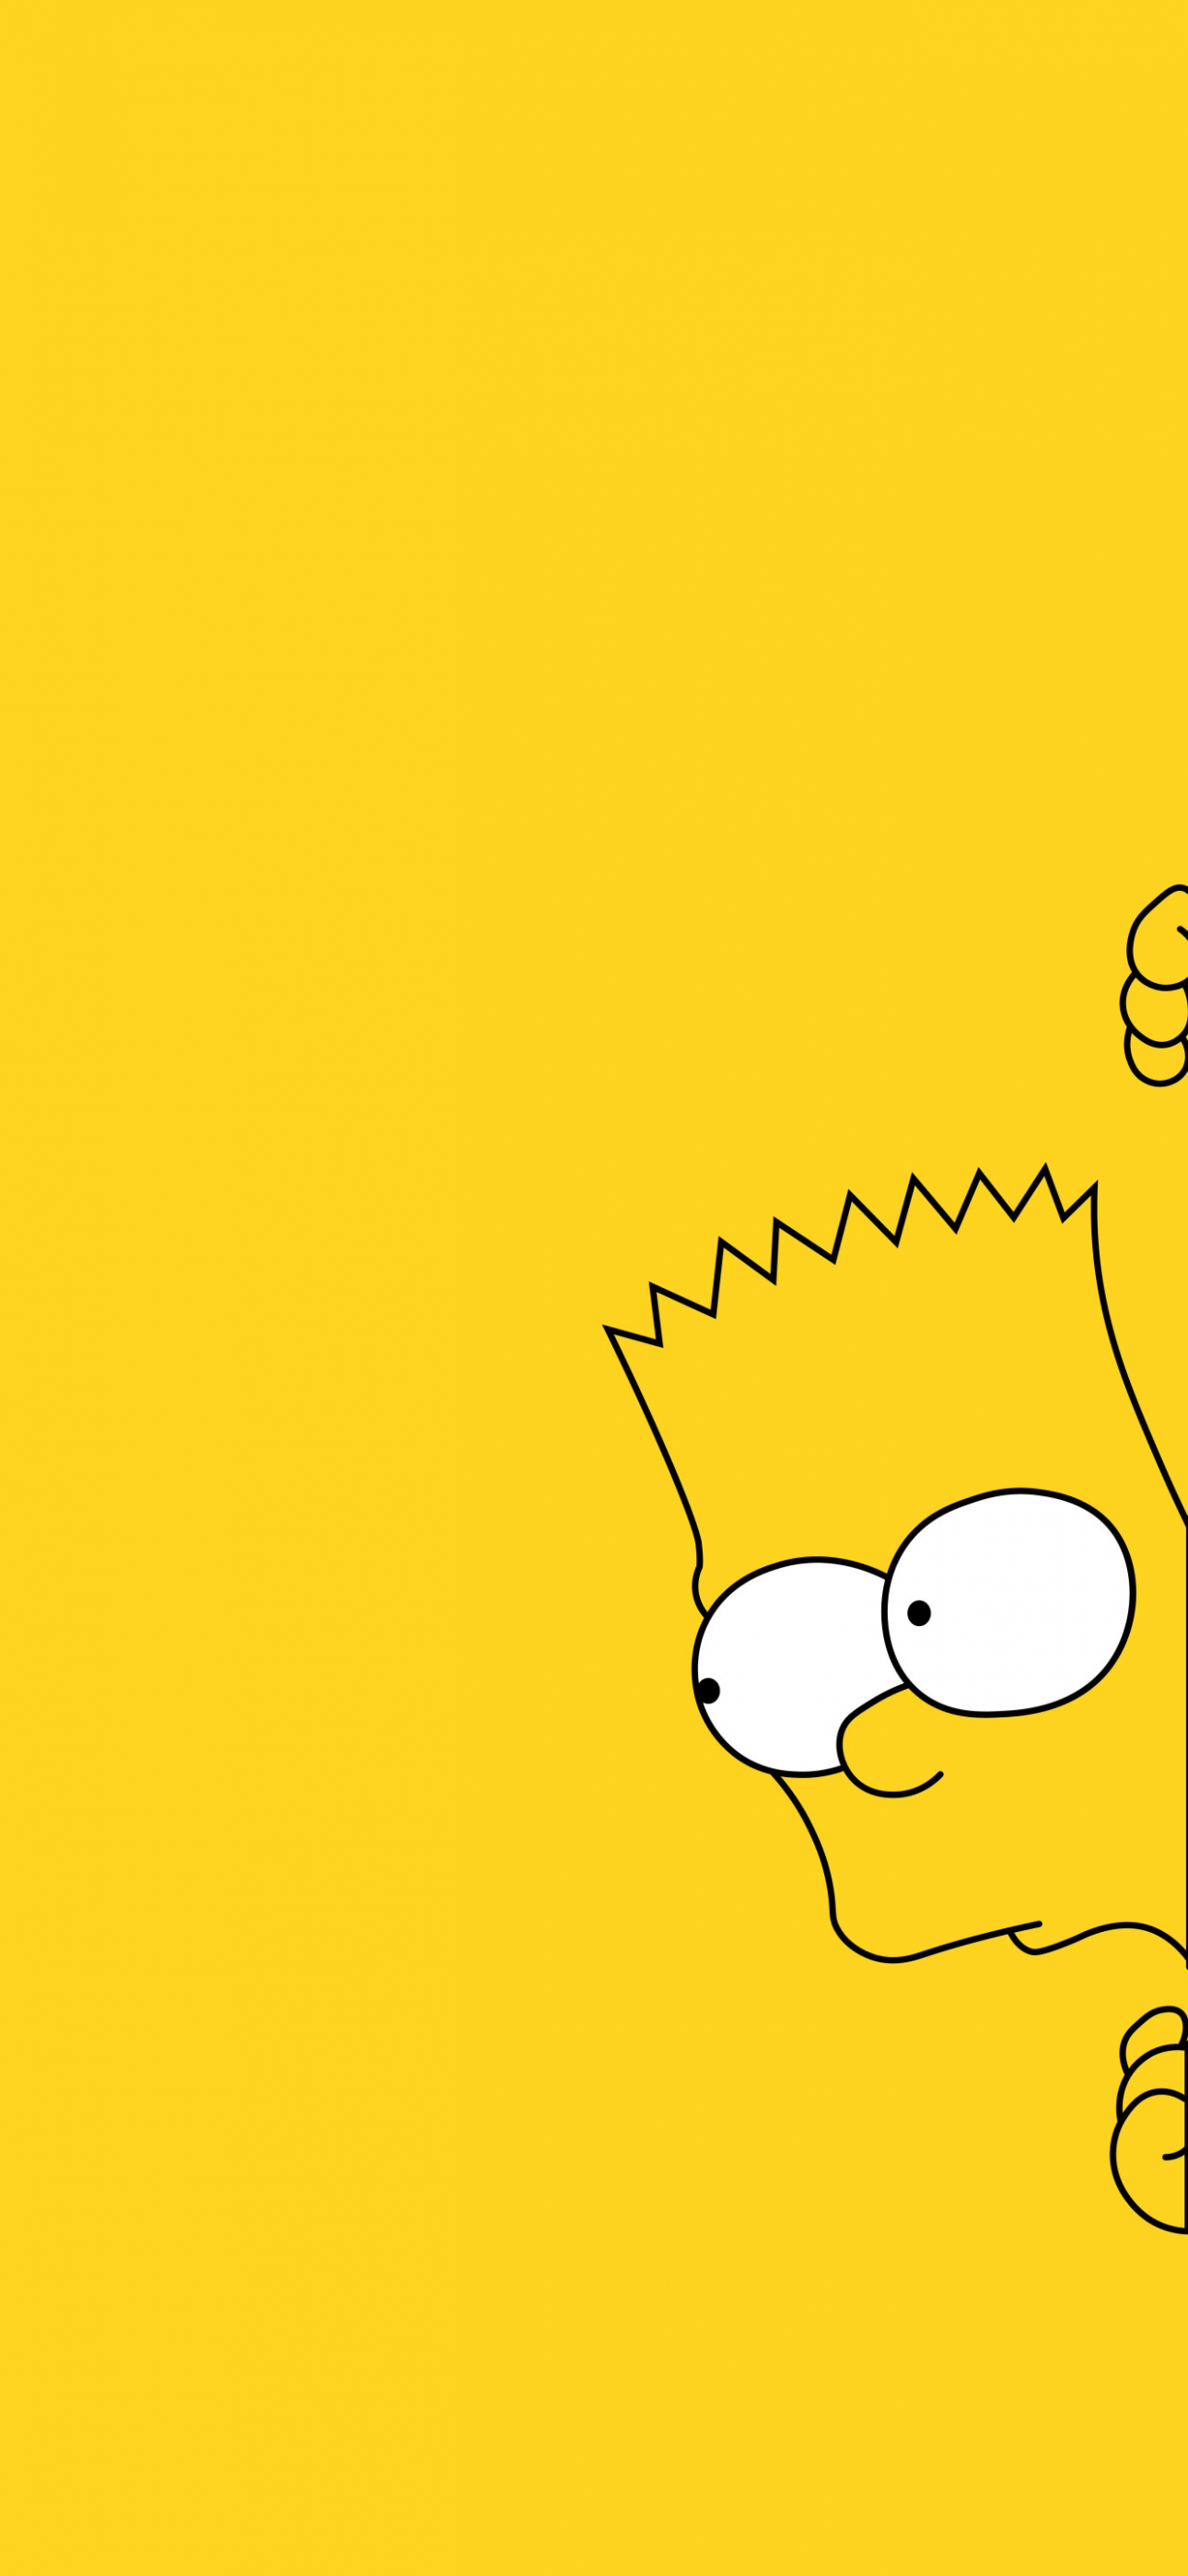 HD wallpaper The Simpsons Maggie Simpson  Wallpaper Flare